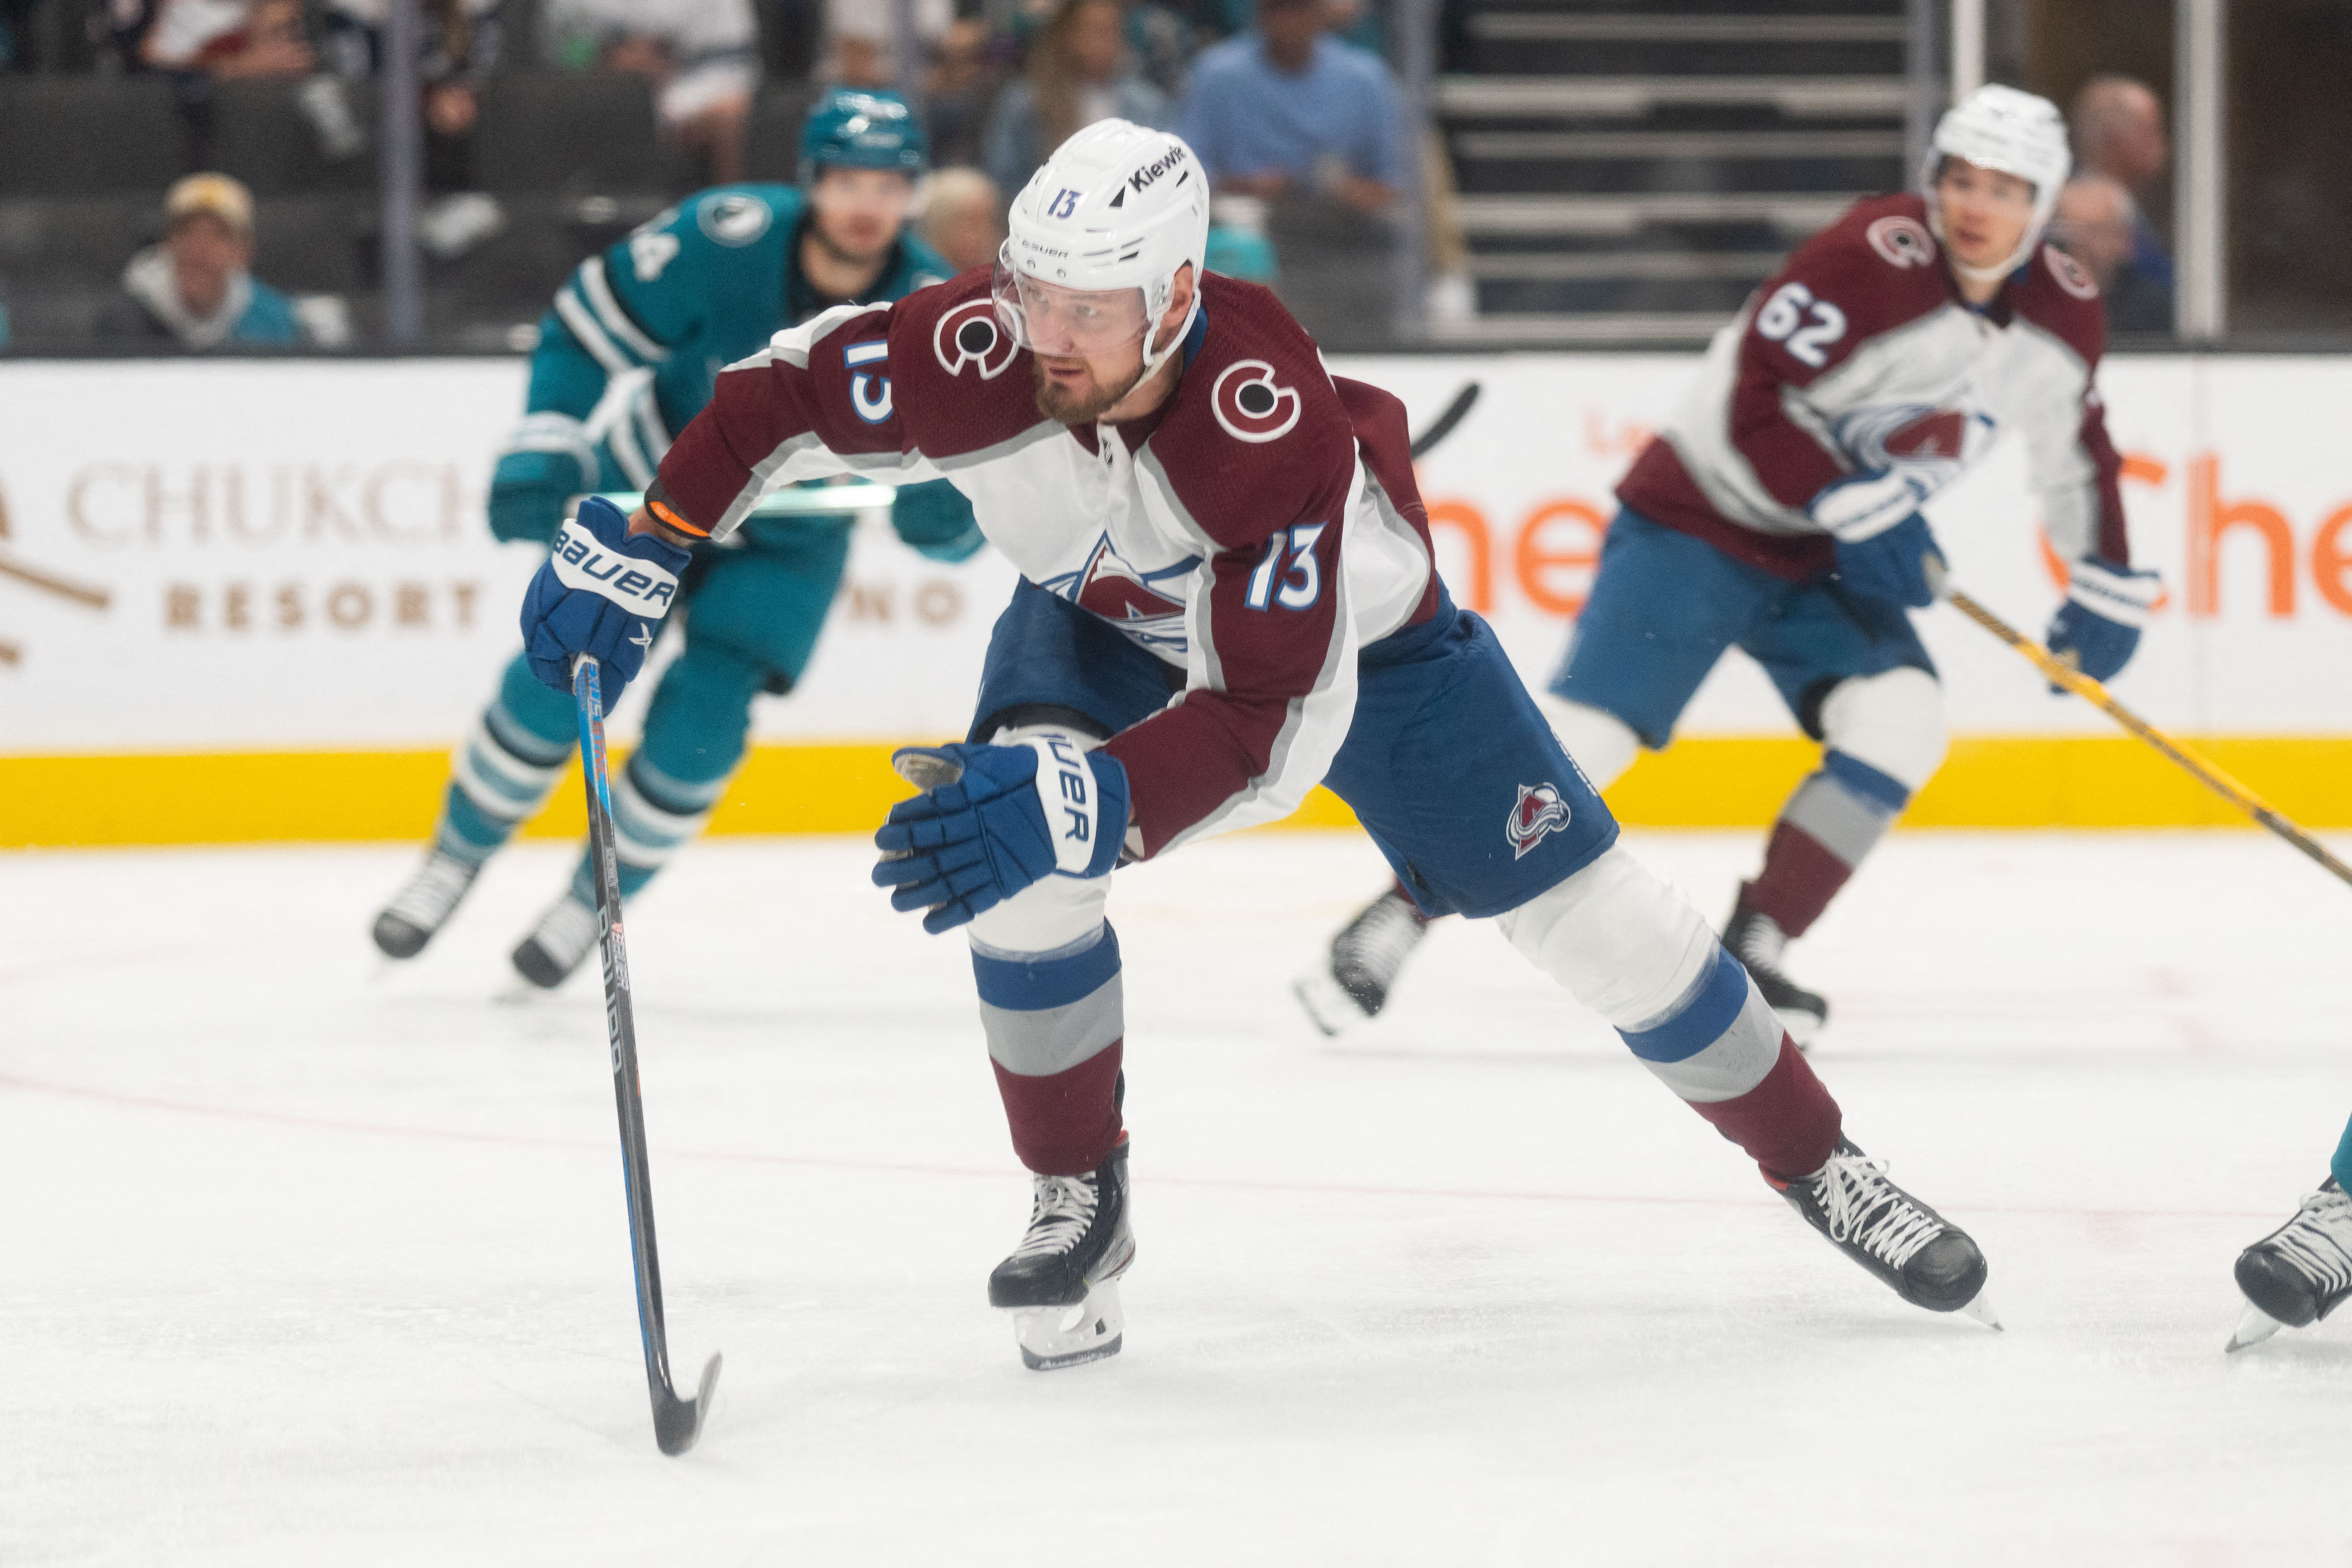 Avalanche, Sharks to meet again, this time in San Jose